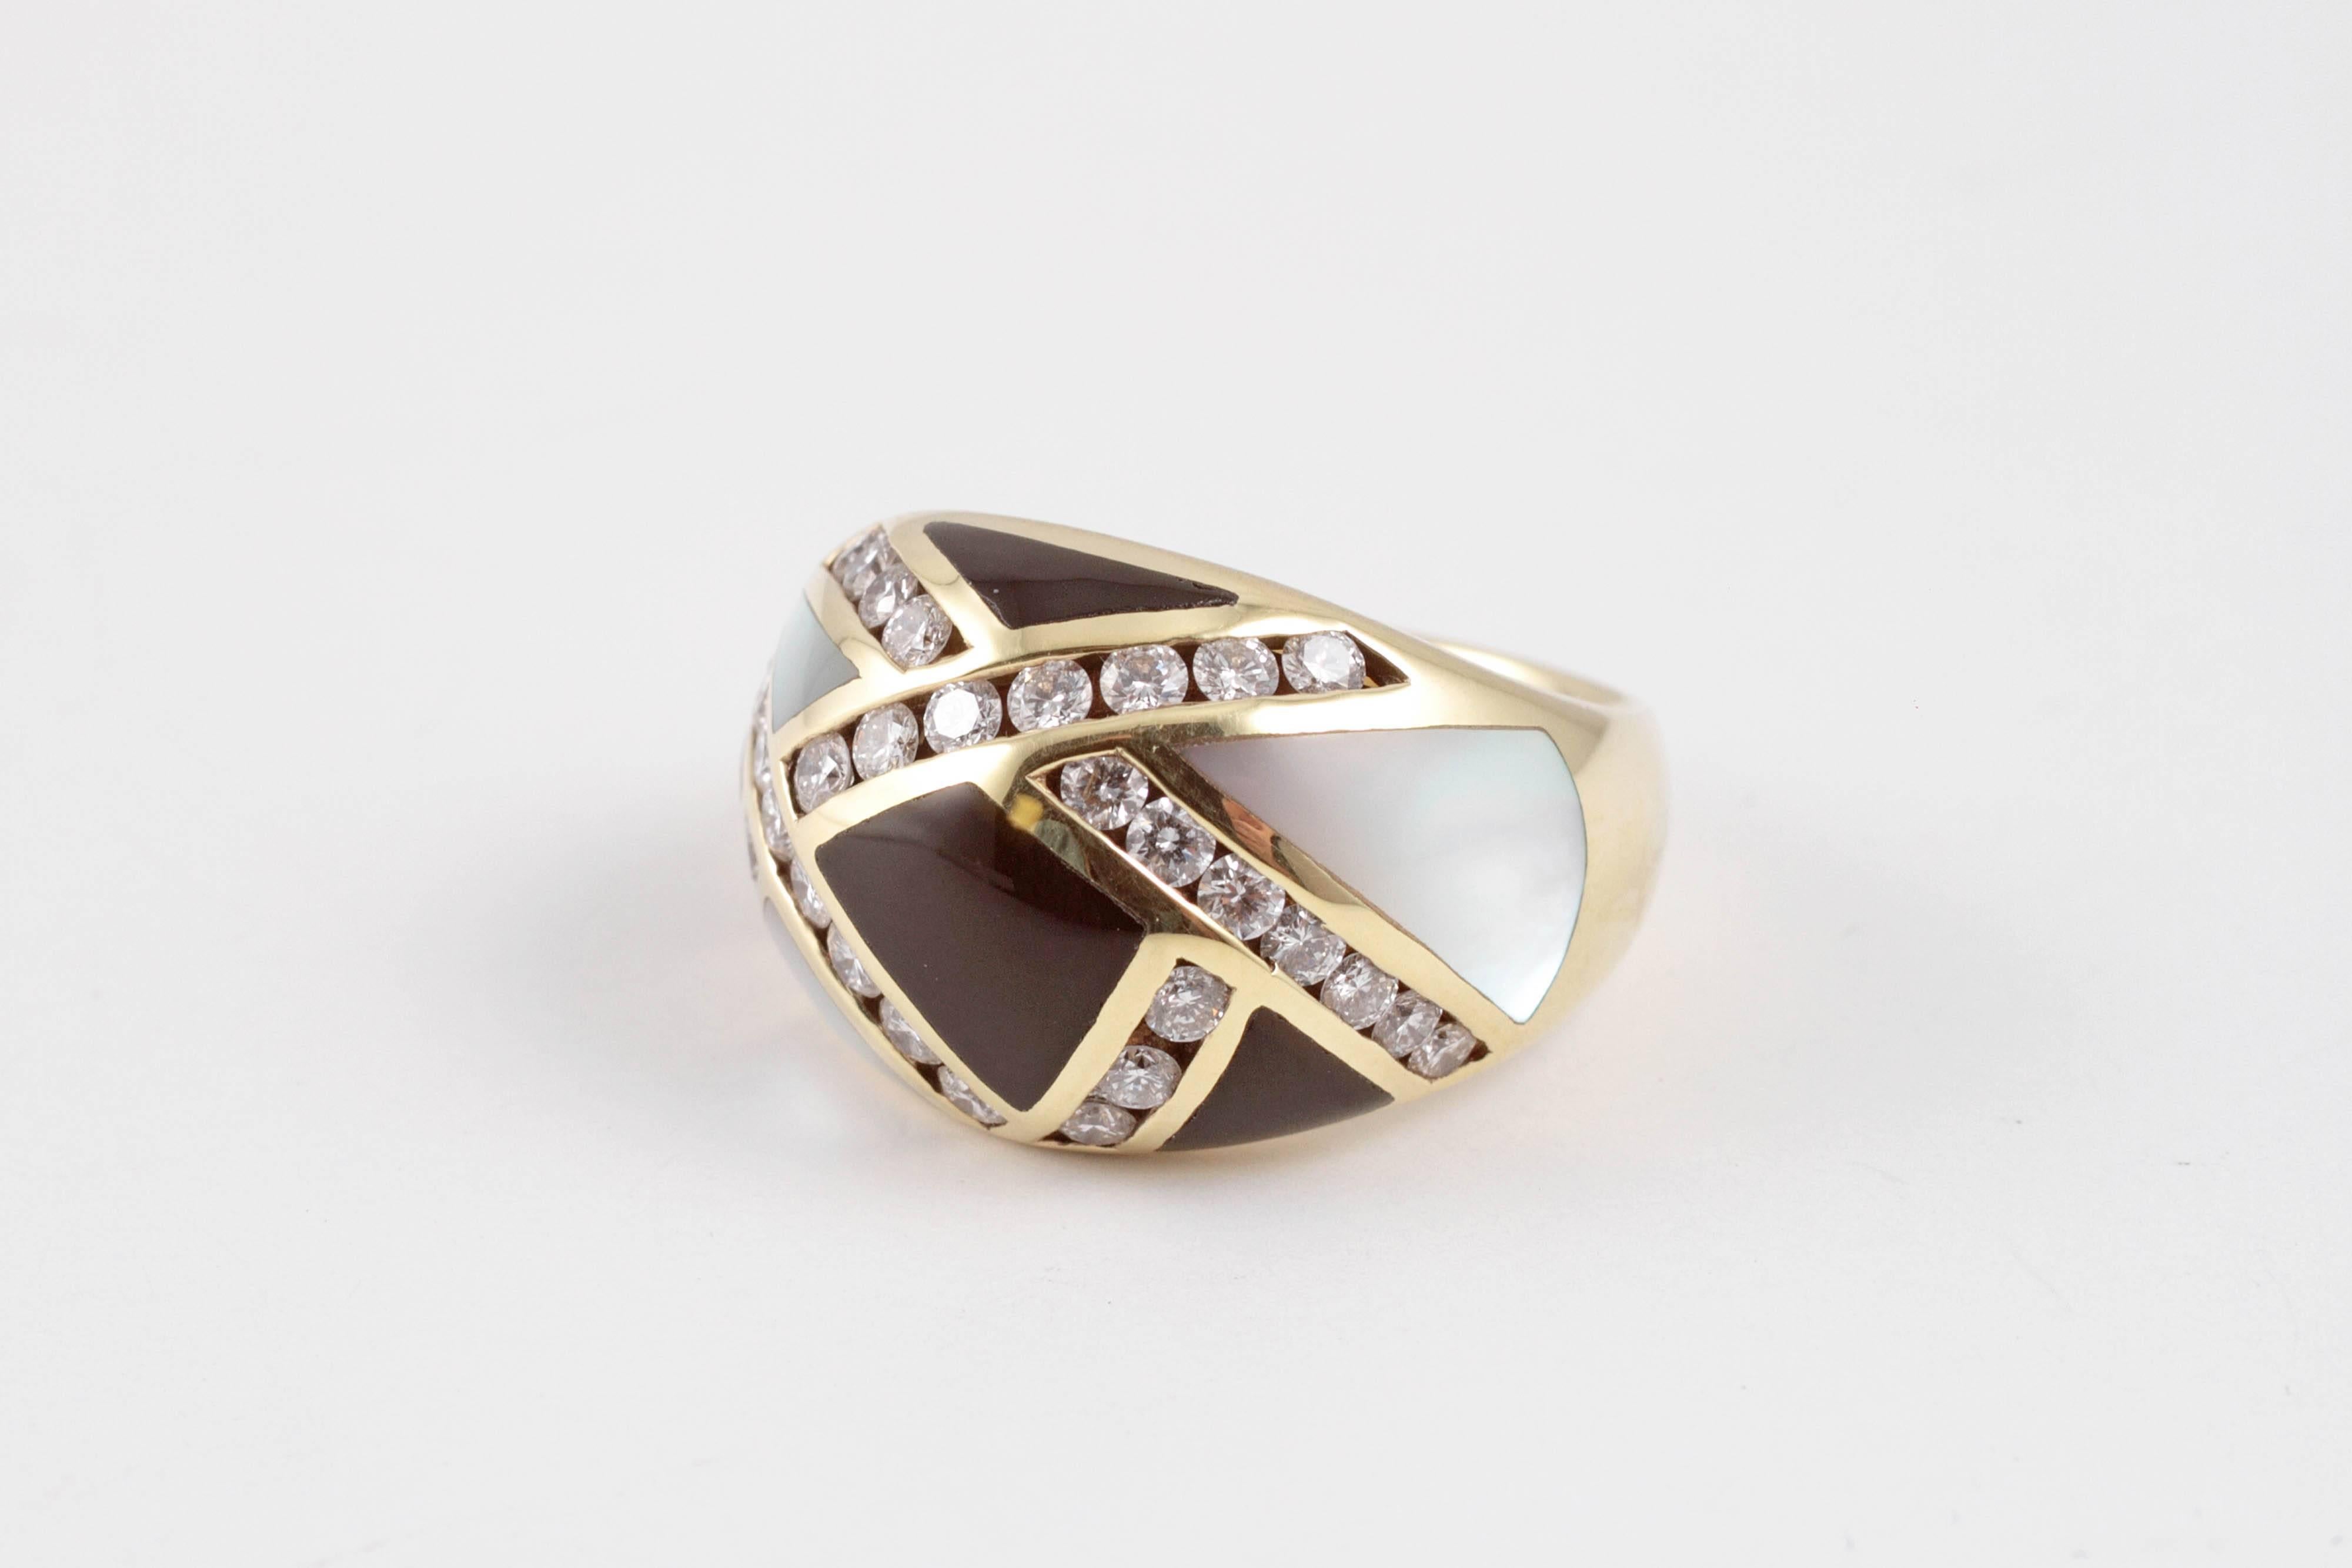 Such a stunner!  In 14 karat yellow gold with 1.00 carat of diamonds, mother-of-pearl and onyx inlays. Size 6 1/2.